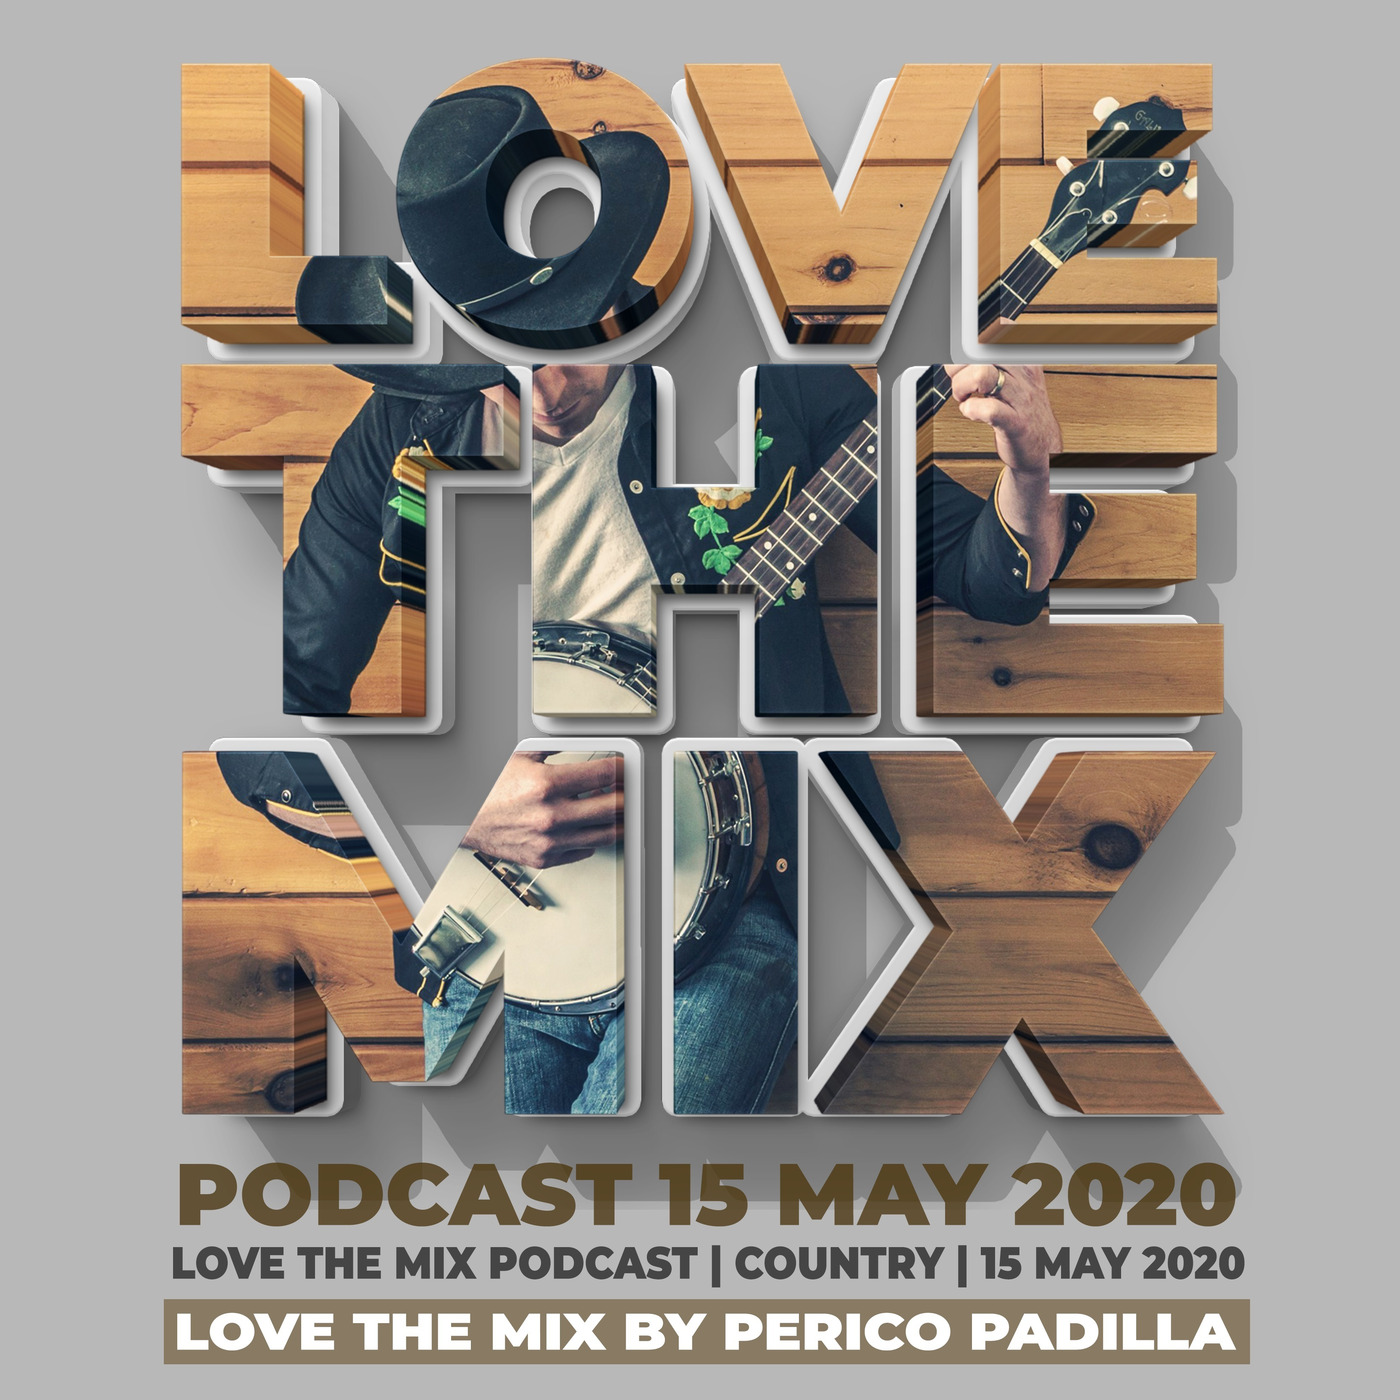 LOVE THE MIX PODCAST | COUNTRY | 15 MAY 2020 By Perico Padilla